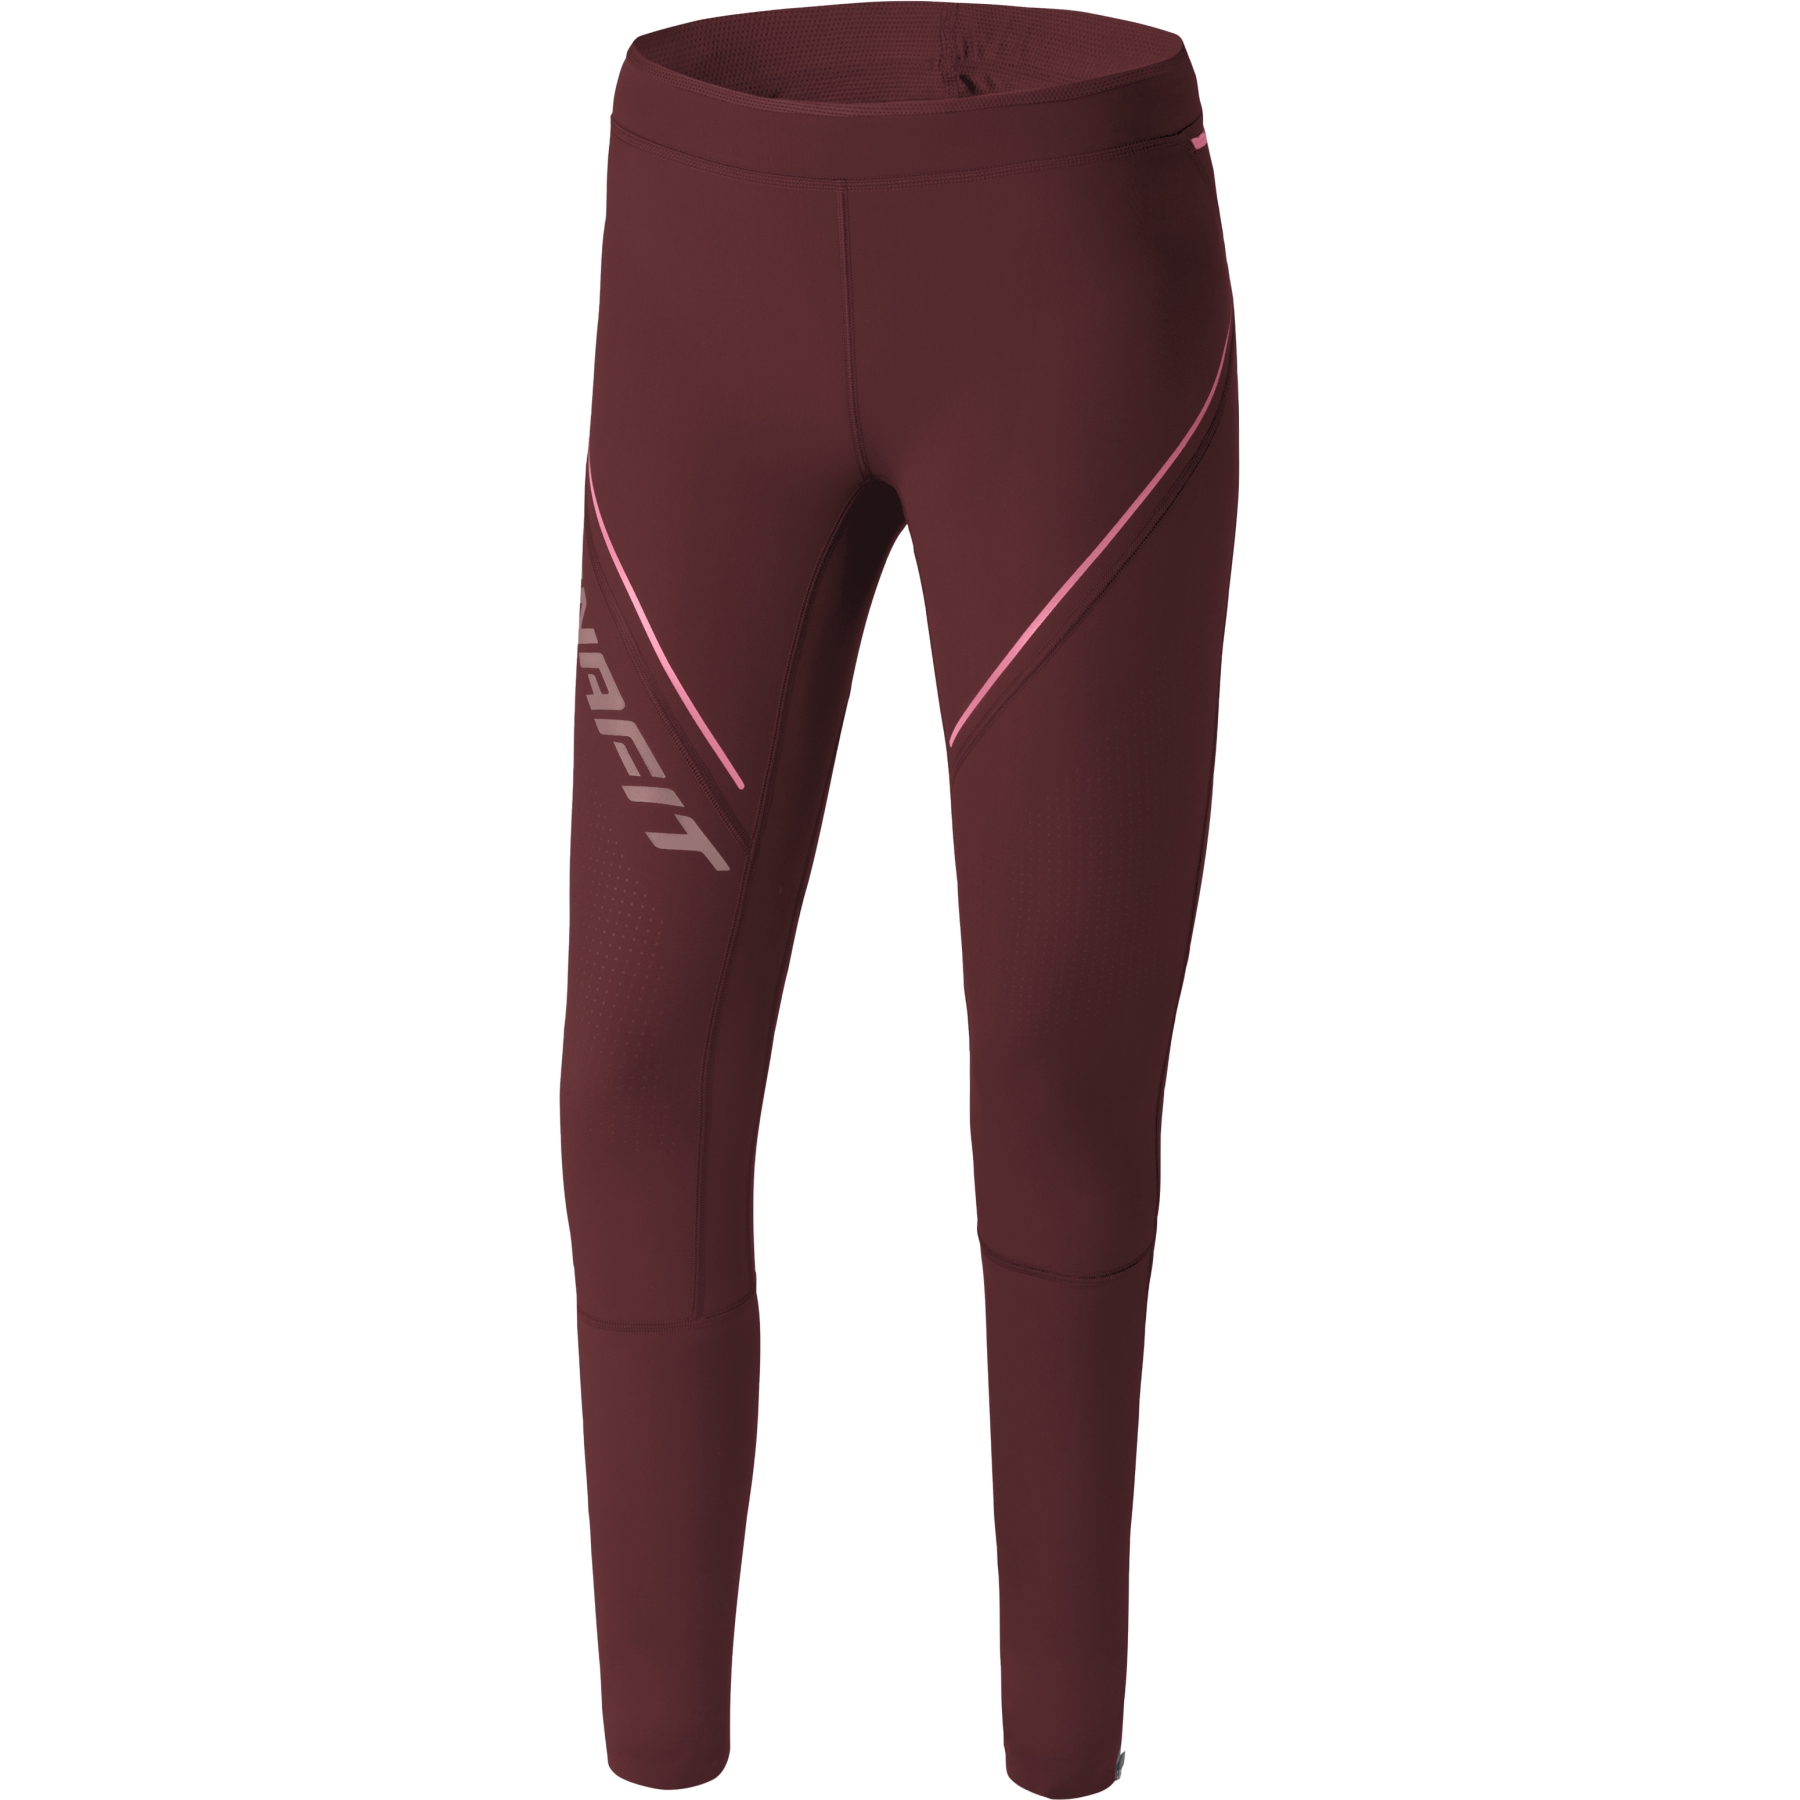 Picture of Dynafit Winter Running Tights Women - Burgundy